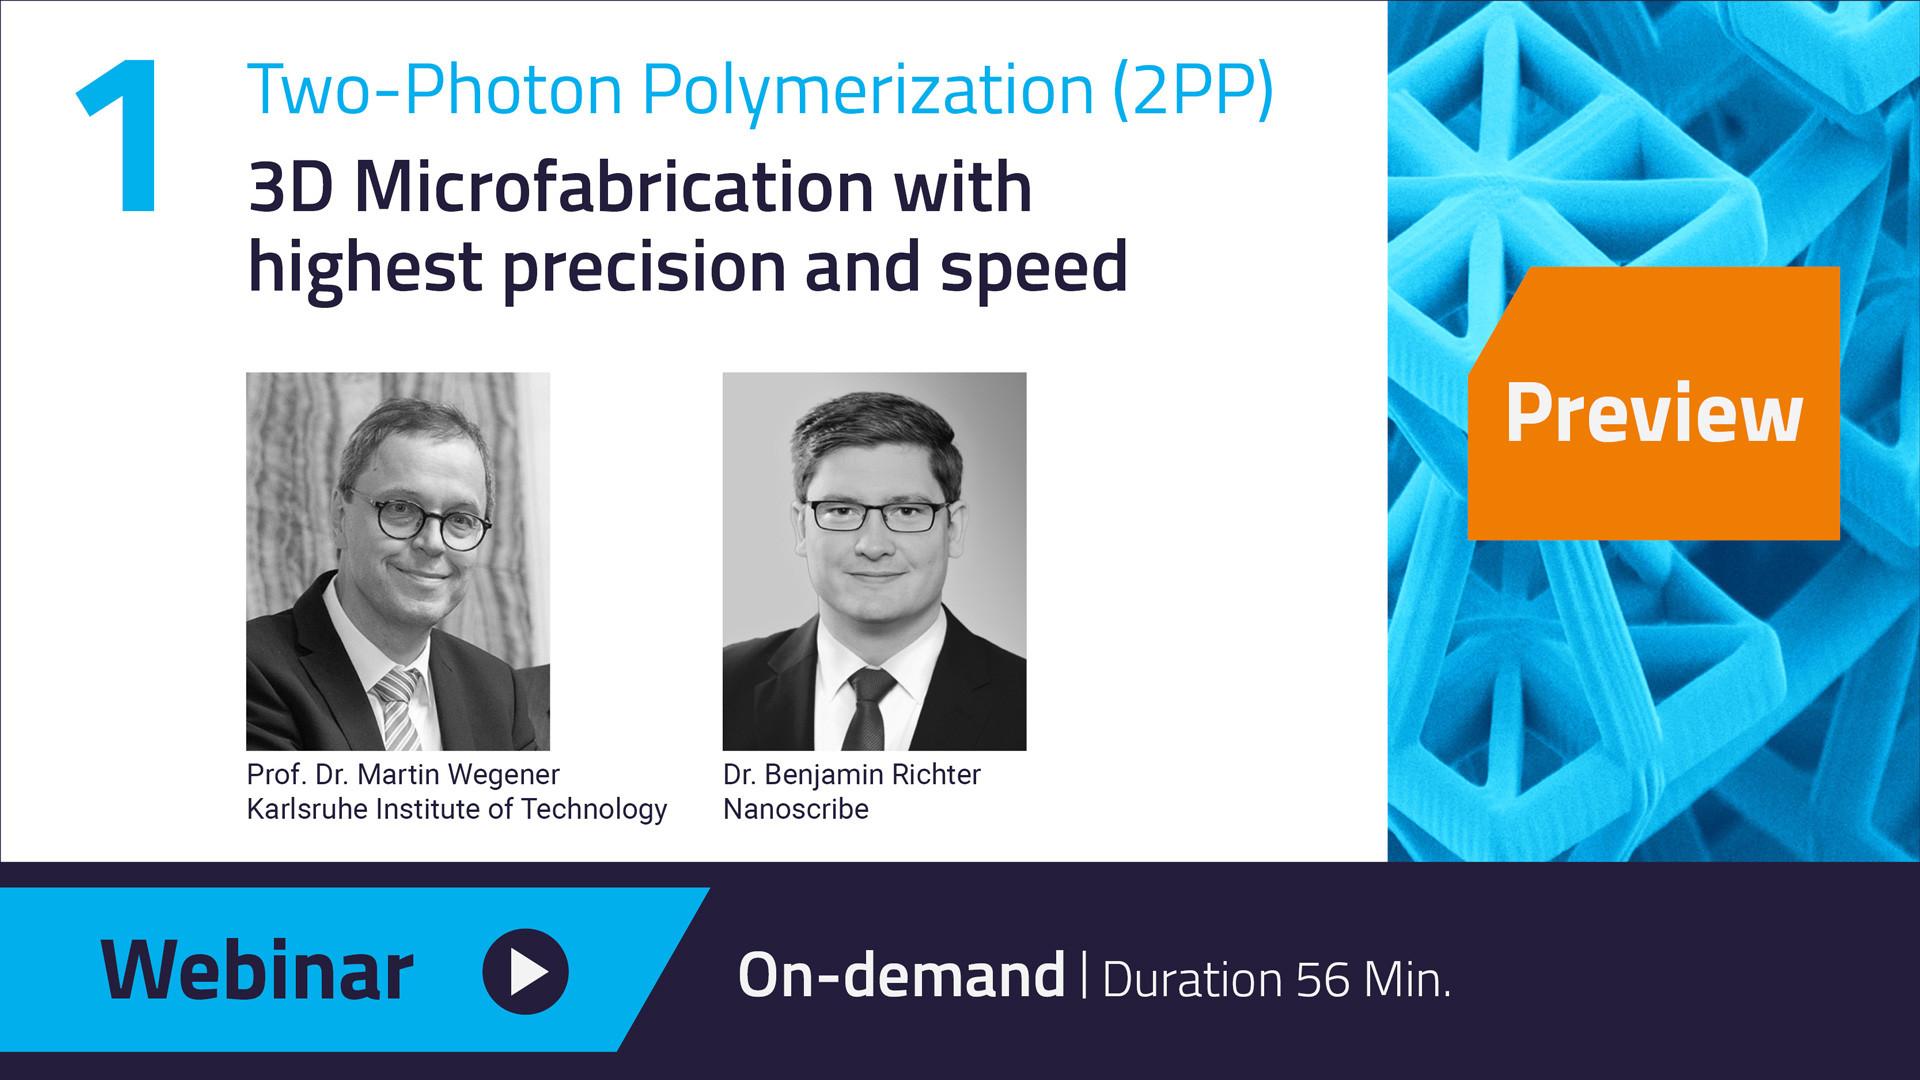 Our Webinar on 2PP is now available on-demand - watch the webinar here